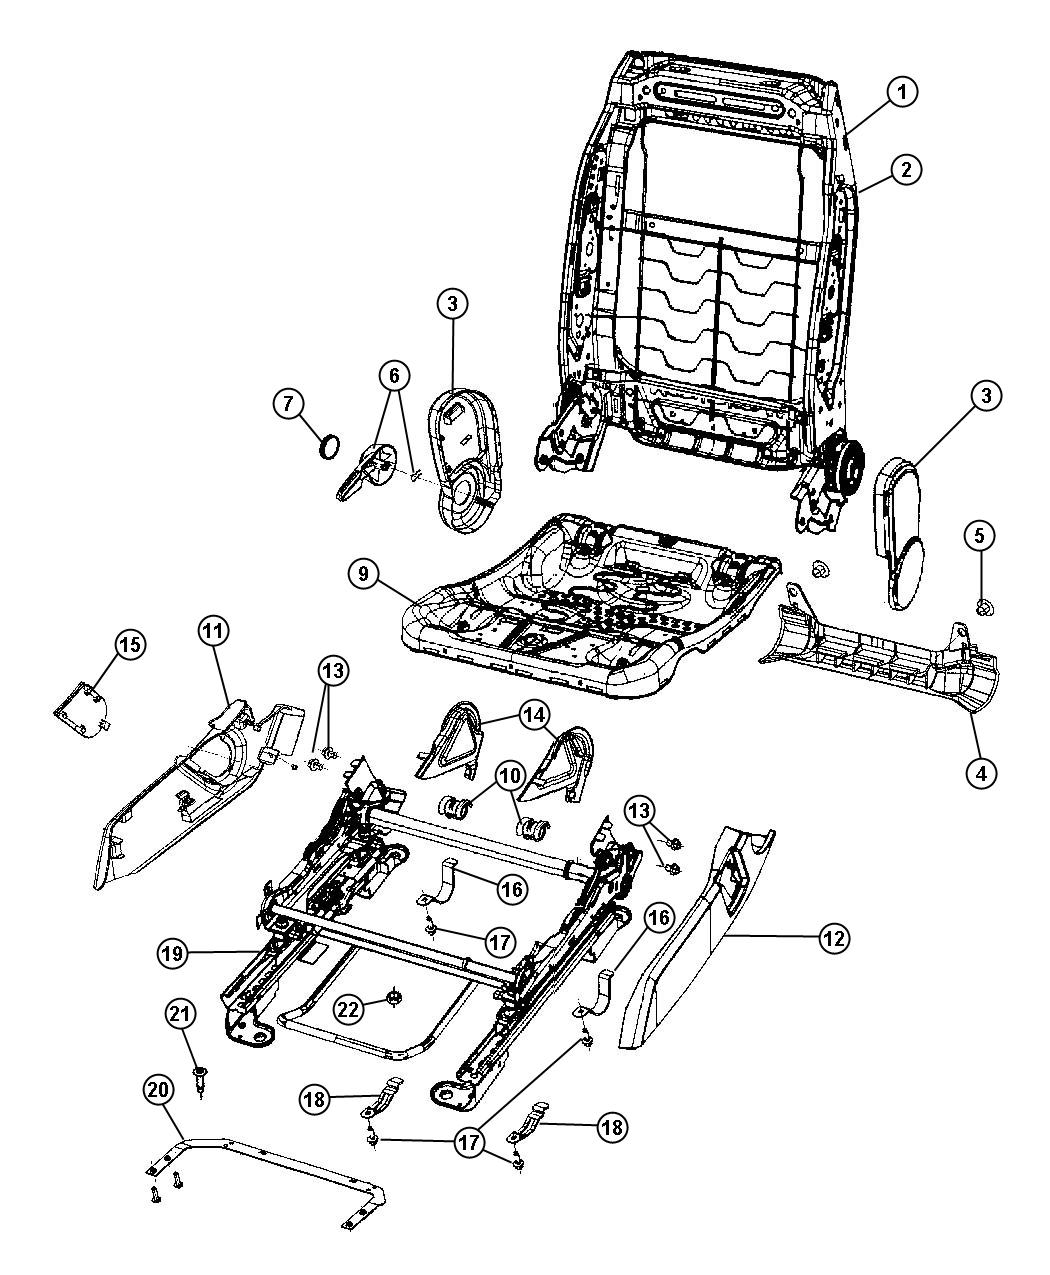 Adjusters , Recliners and Shields - Passenger Seat - Manual. Diagram